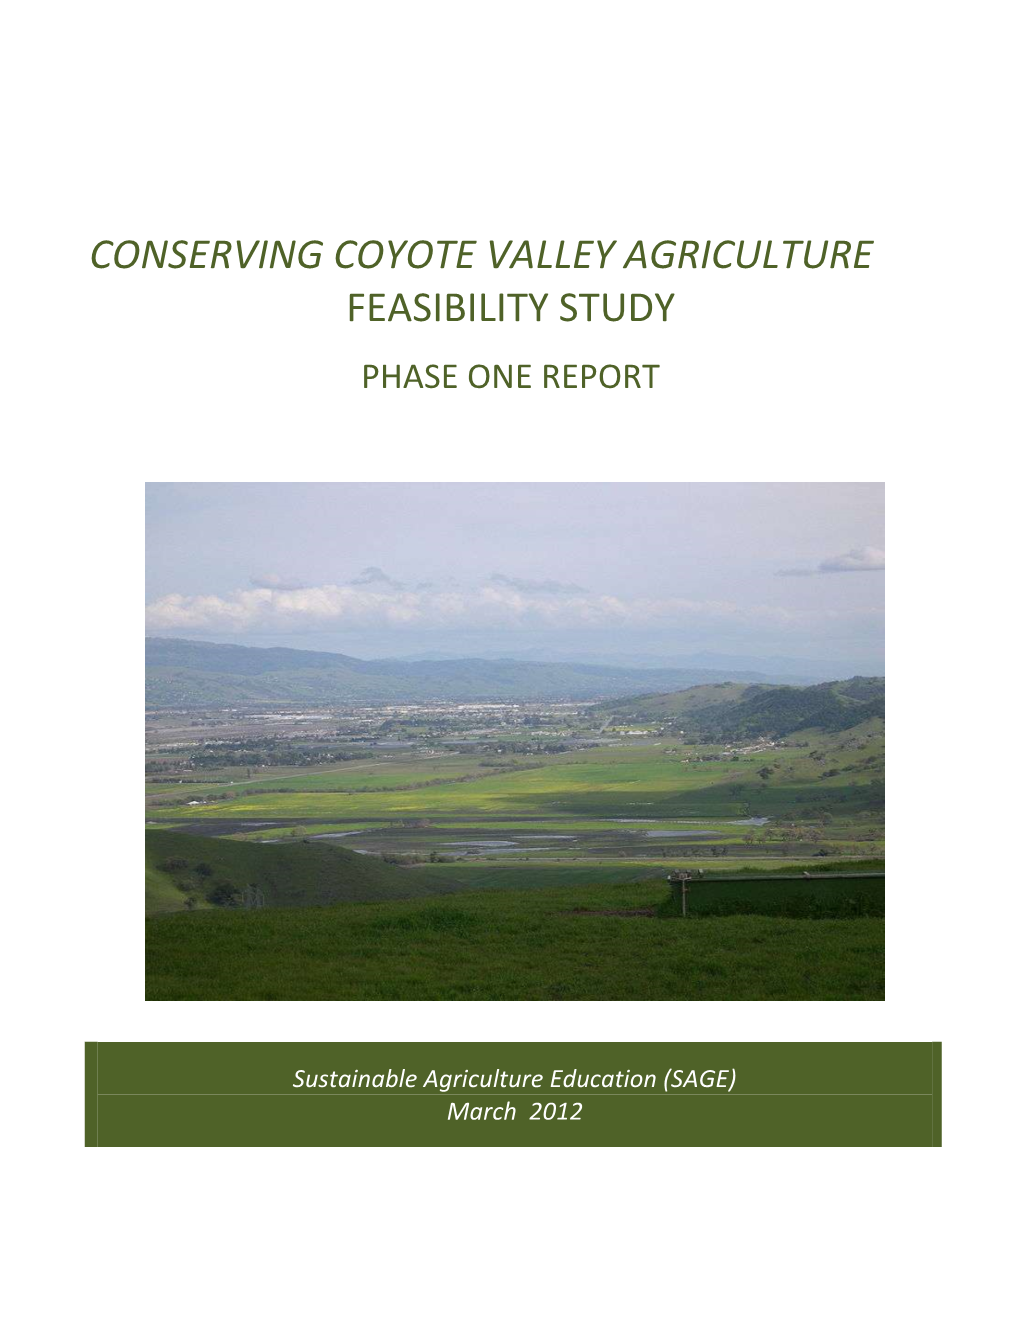 Coyote Valley Agriculture Feasibility Study Phase 1 Report